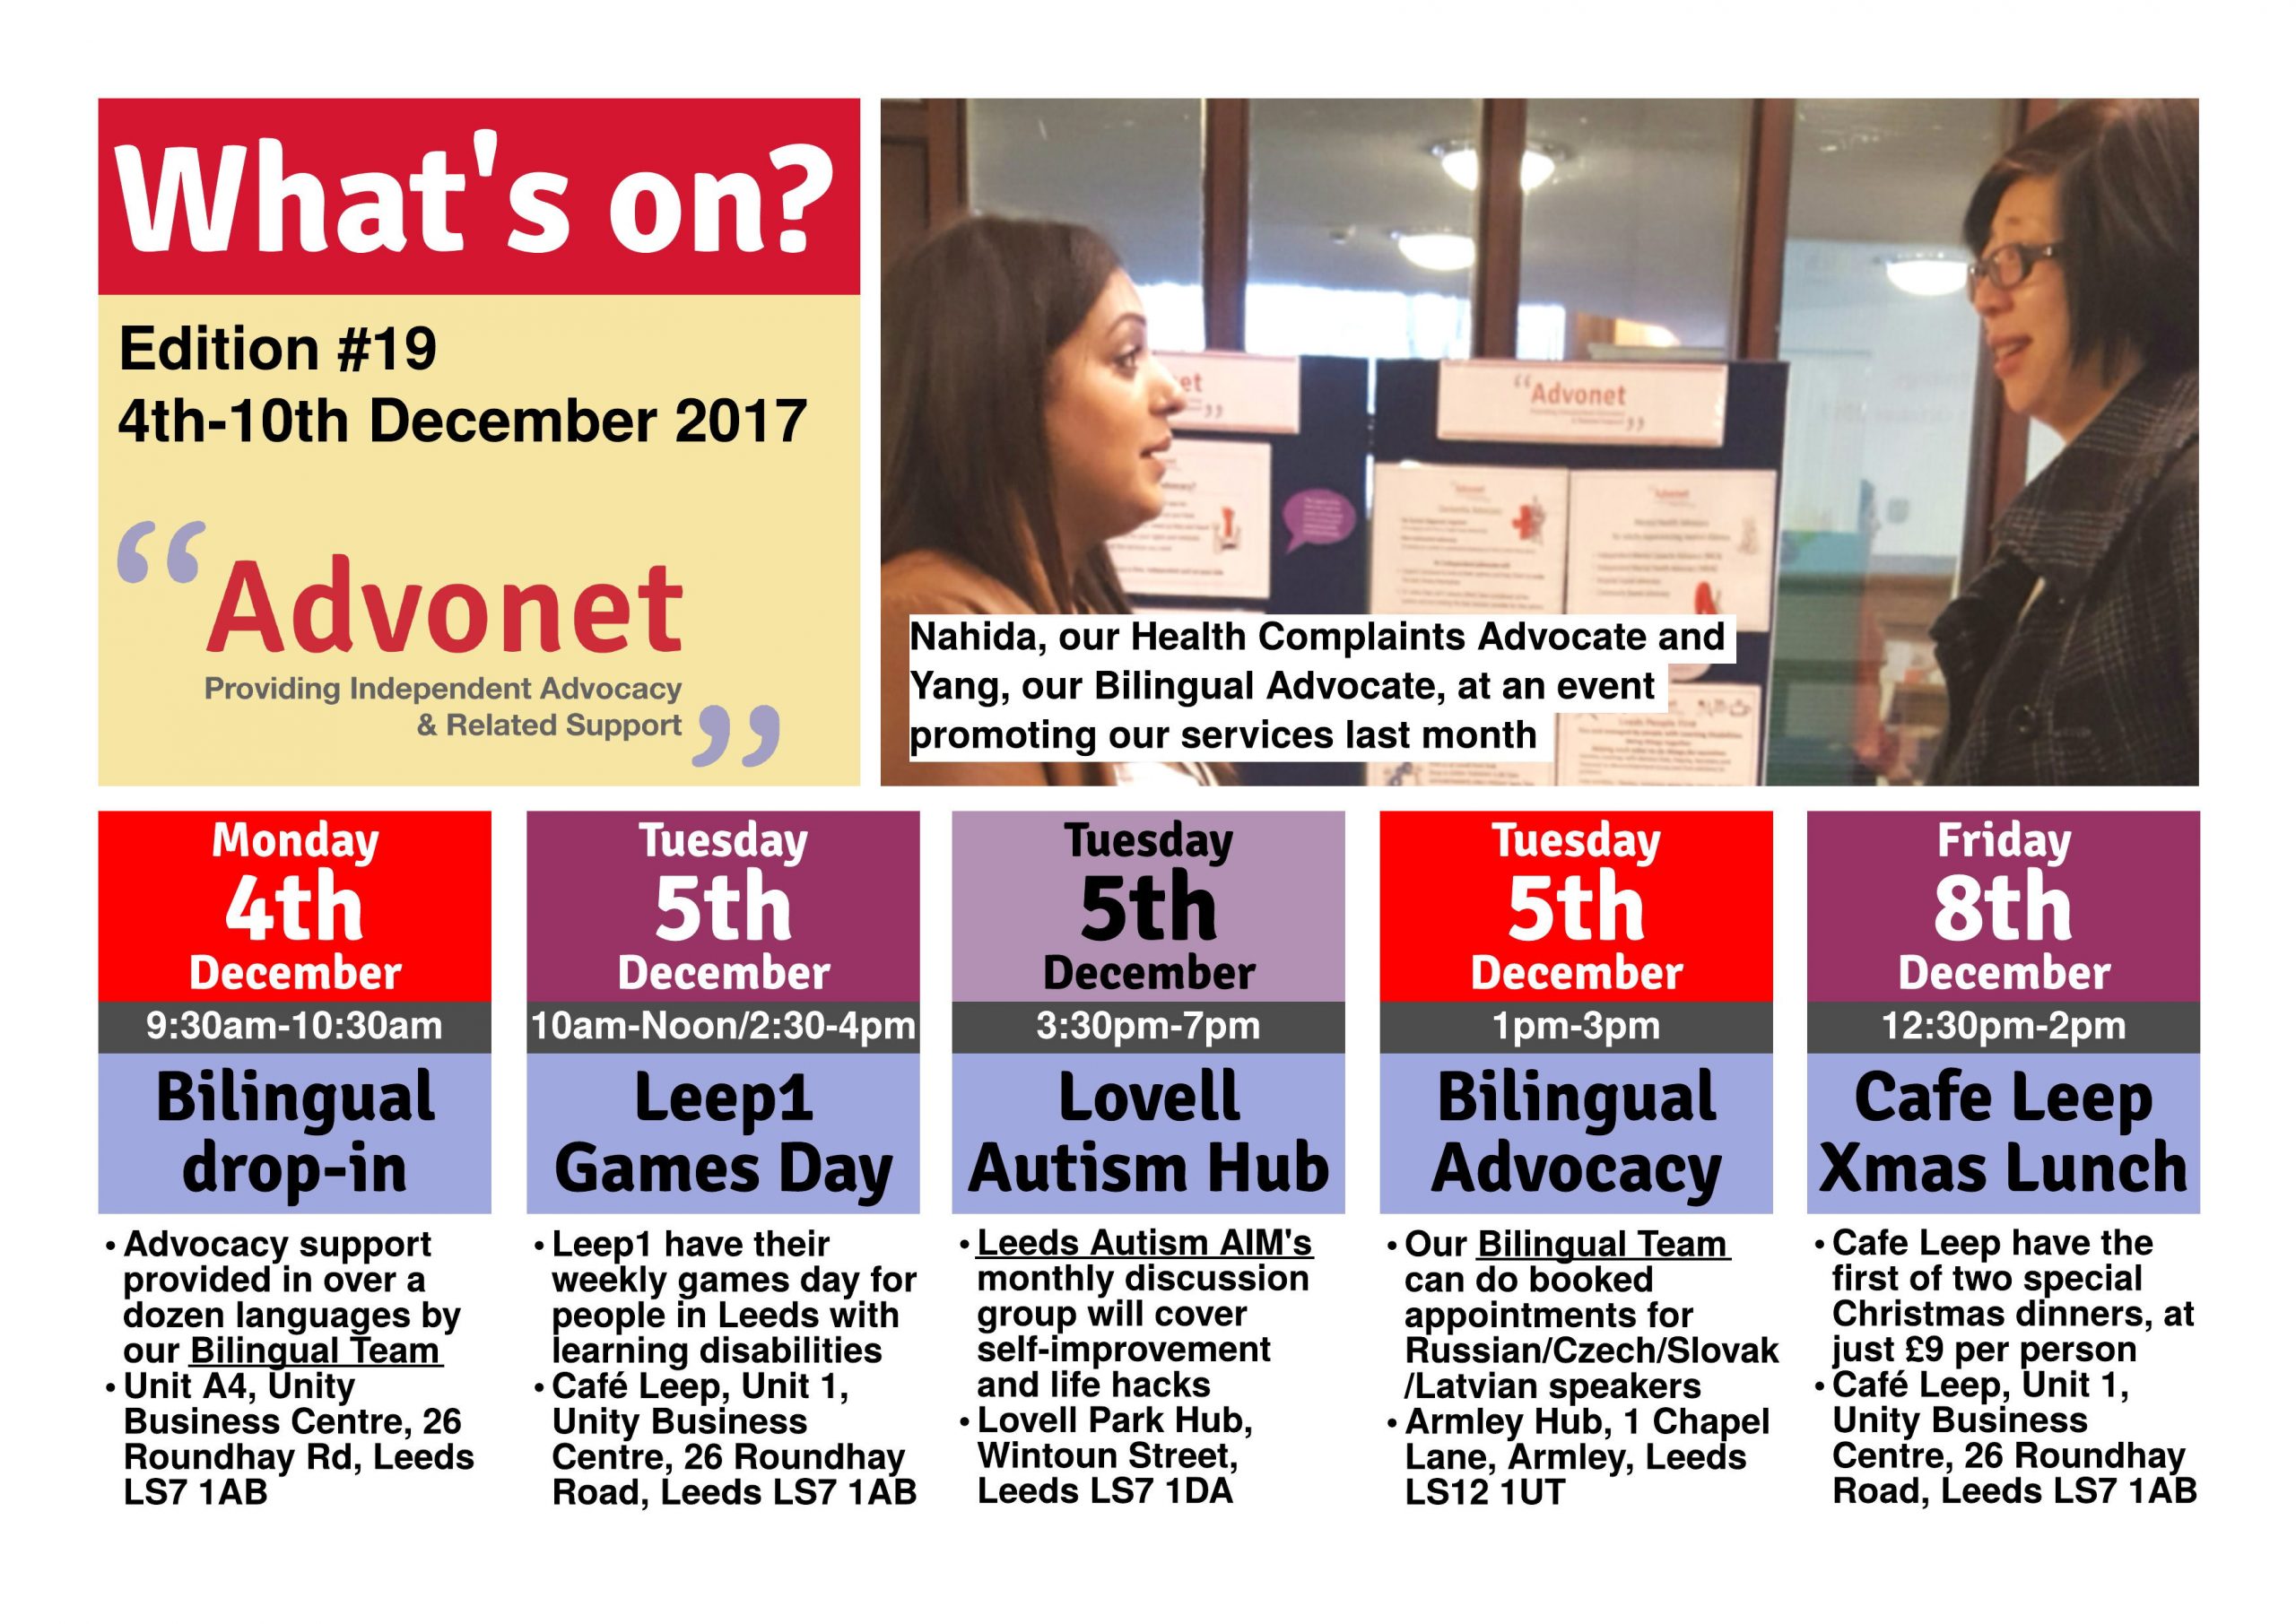 What's on 4th-10th December 2017